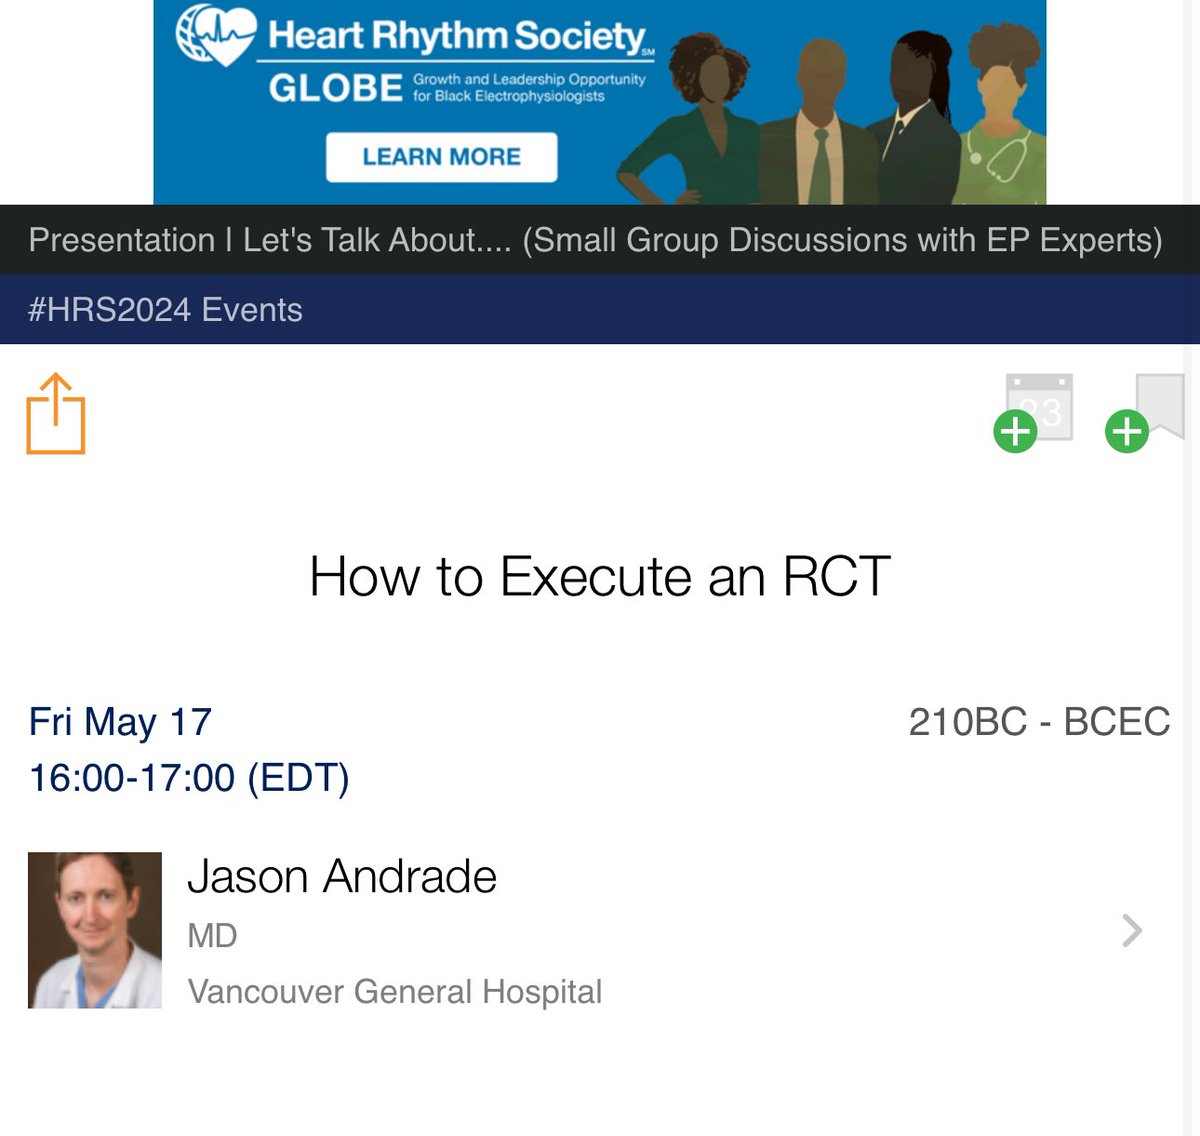 If you’re at #HRS2024 consider dropping by the roundtable session. We will be having a conversation about how to execute an RCT.